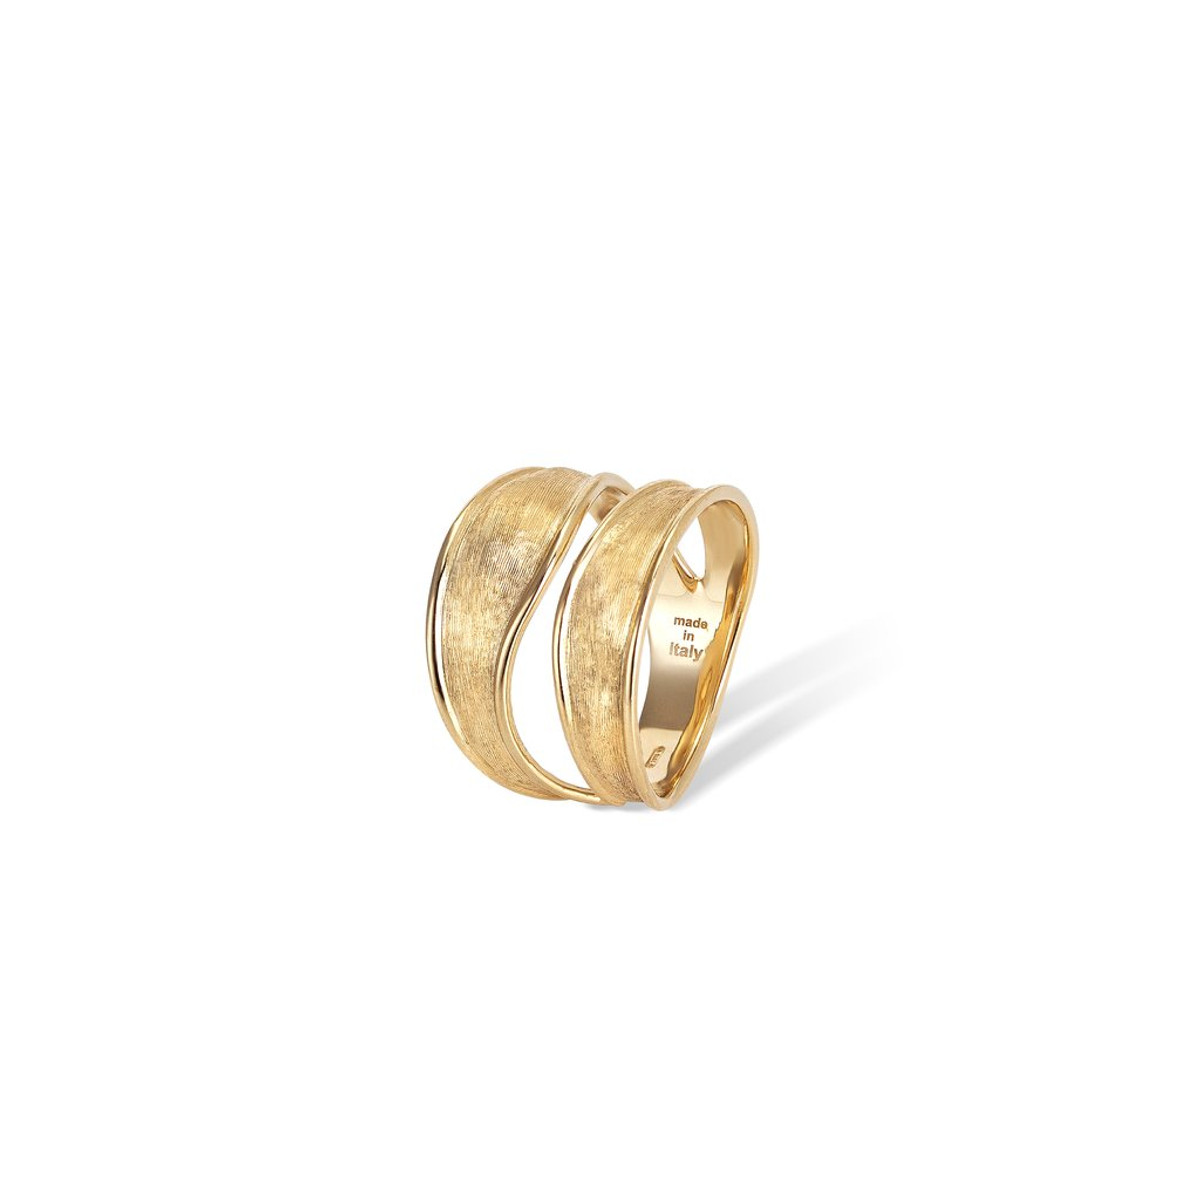 Marco Bicego Lunaria Collection 18K Yellow Gold Split Ring-54698 Product Image